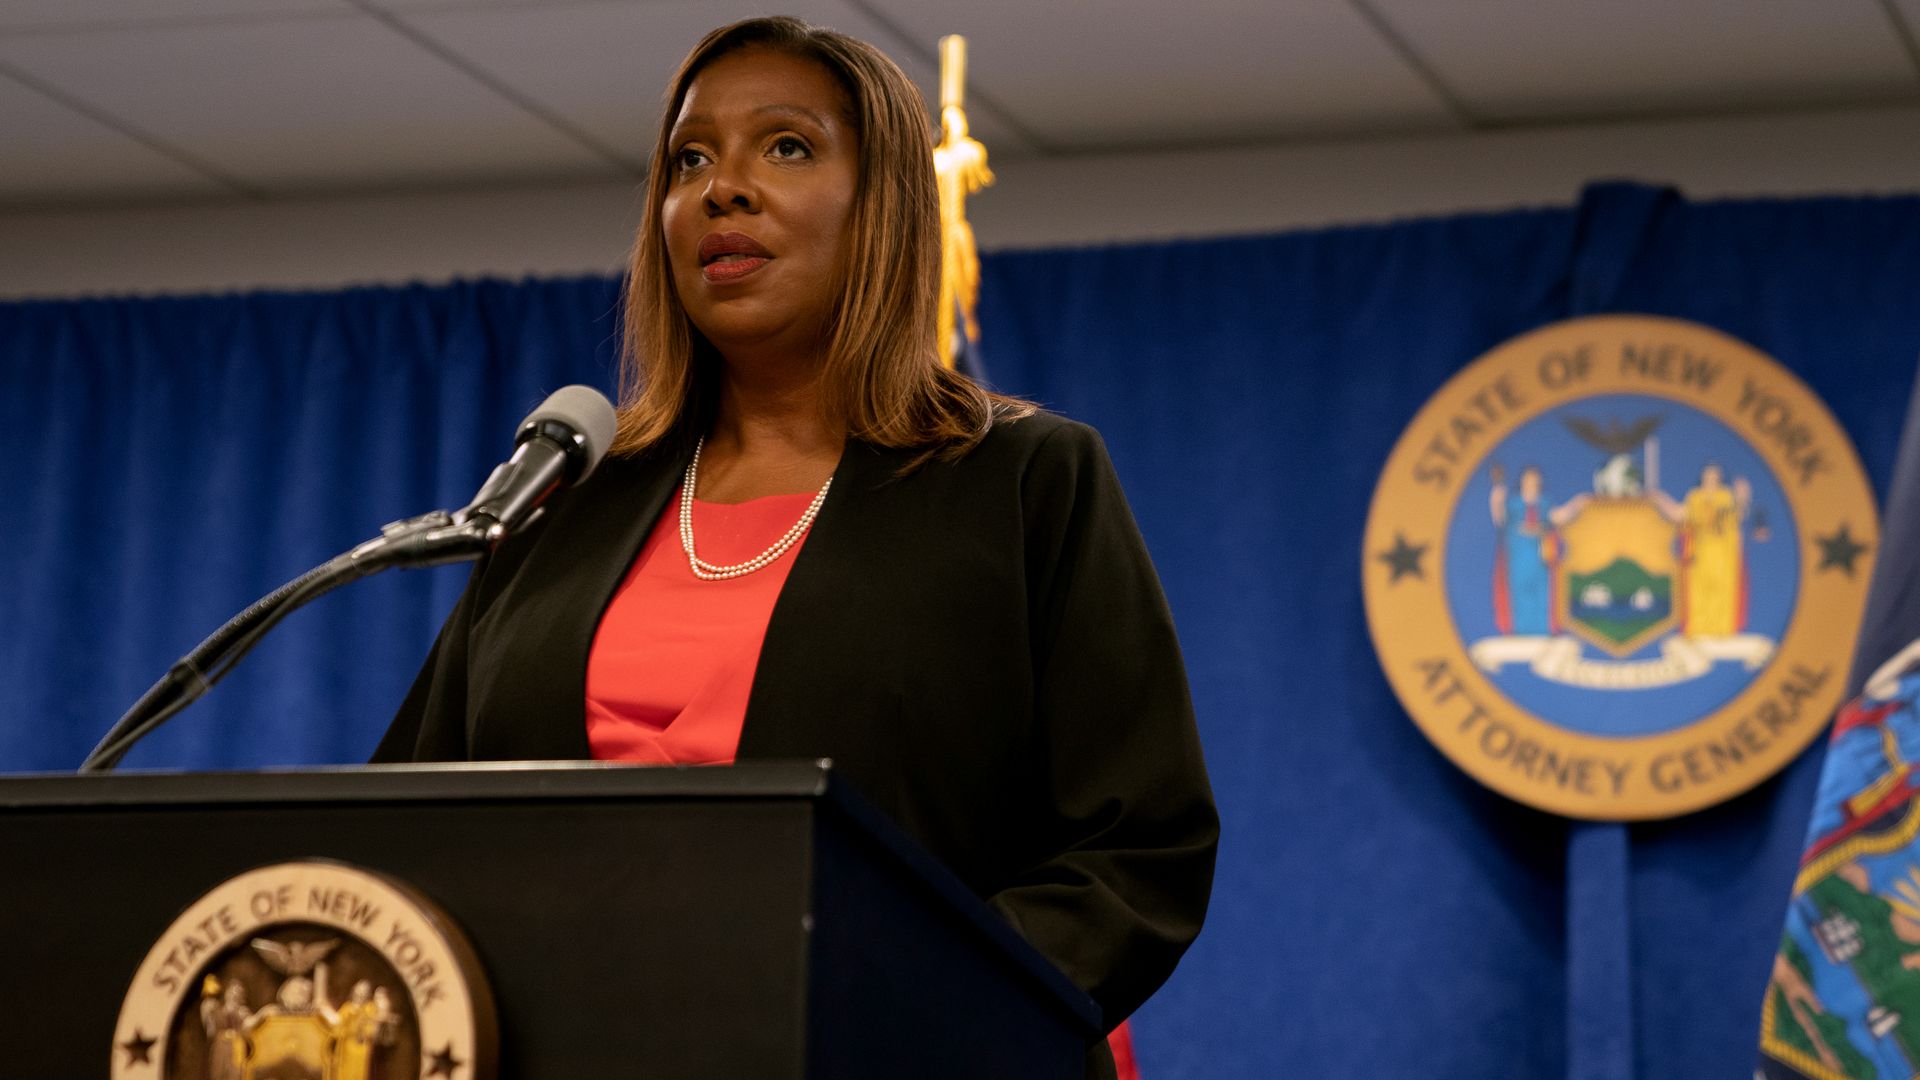 New York Attorney General Letitia James speaking in New York City in August 2021.